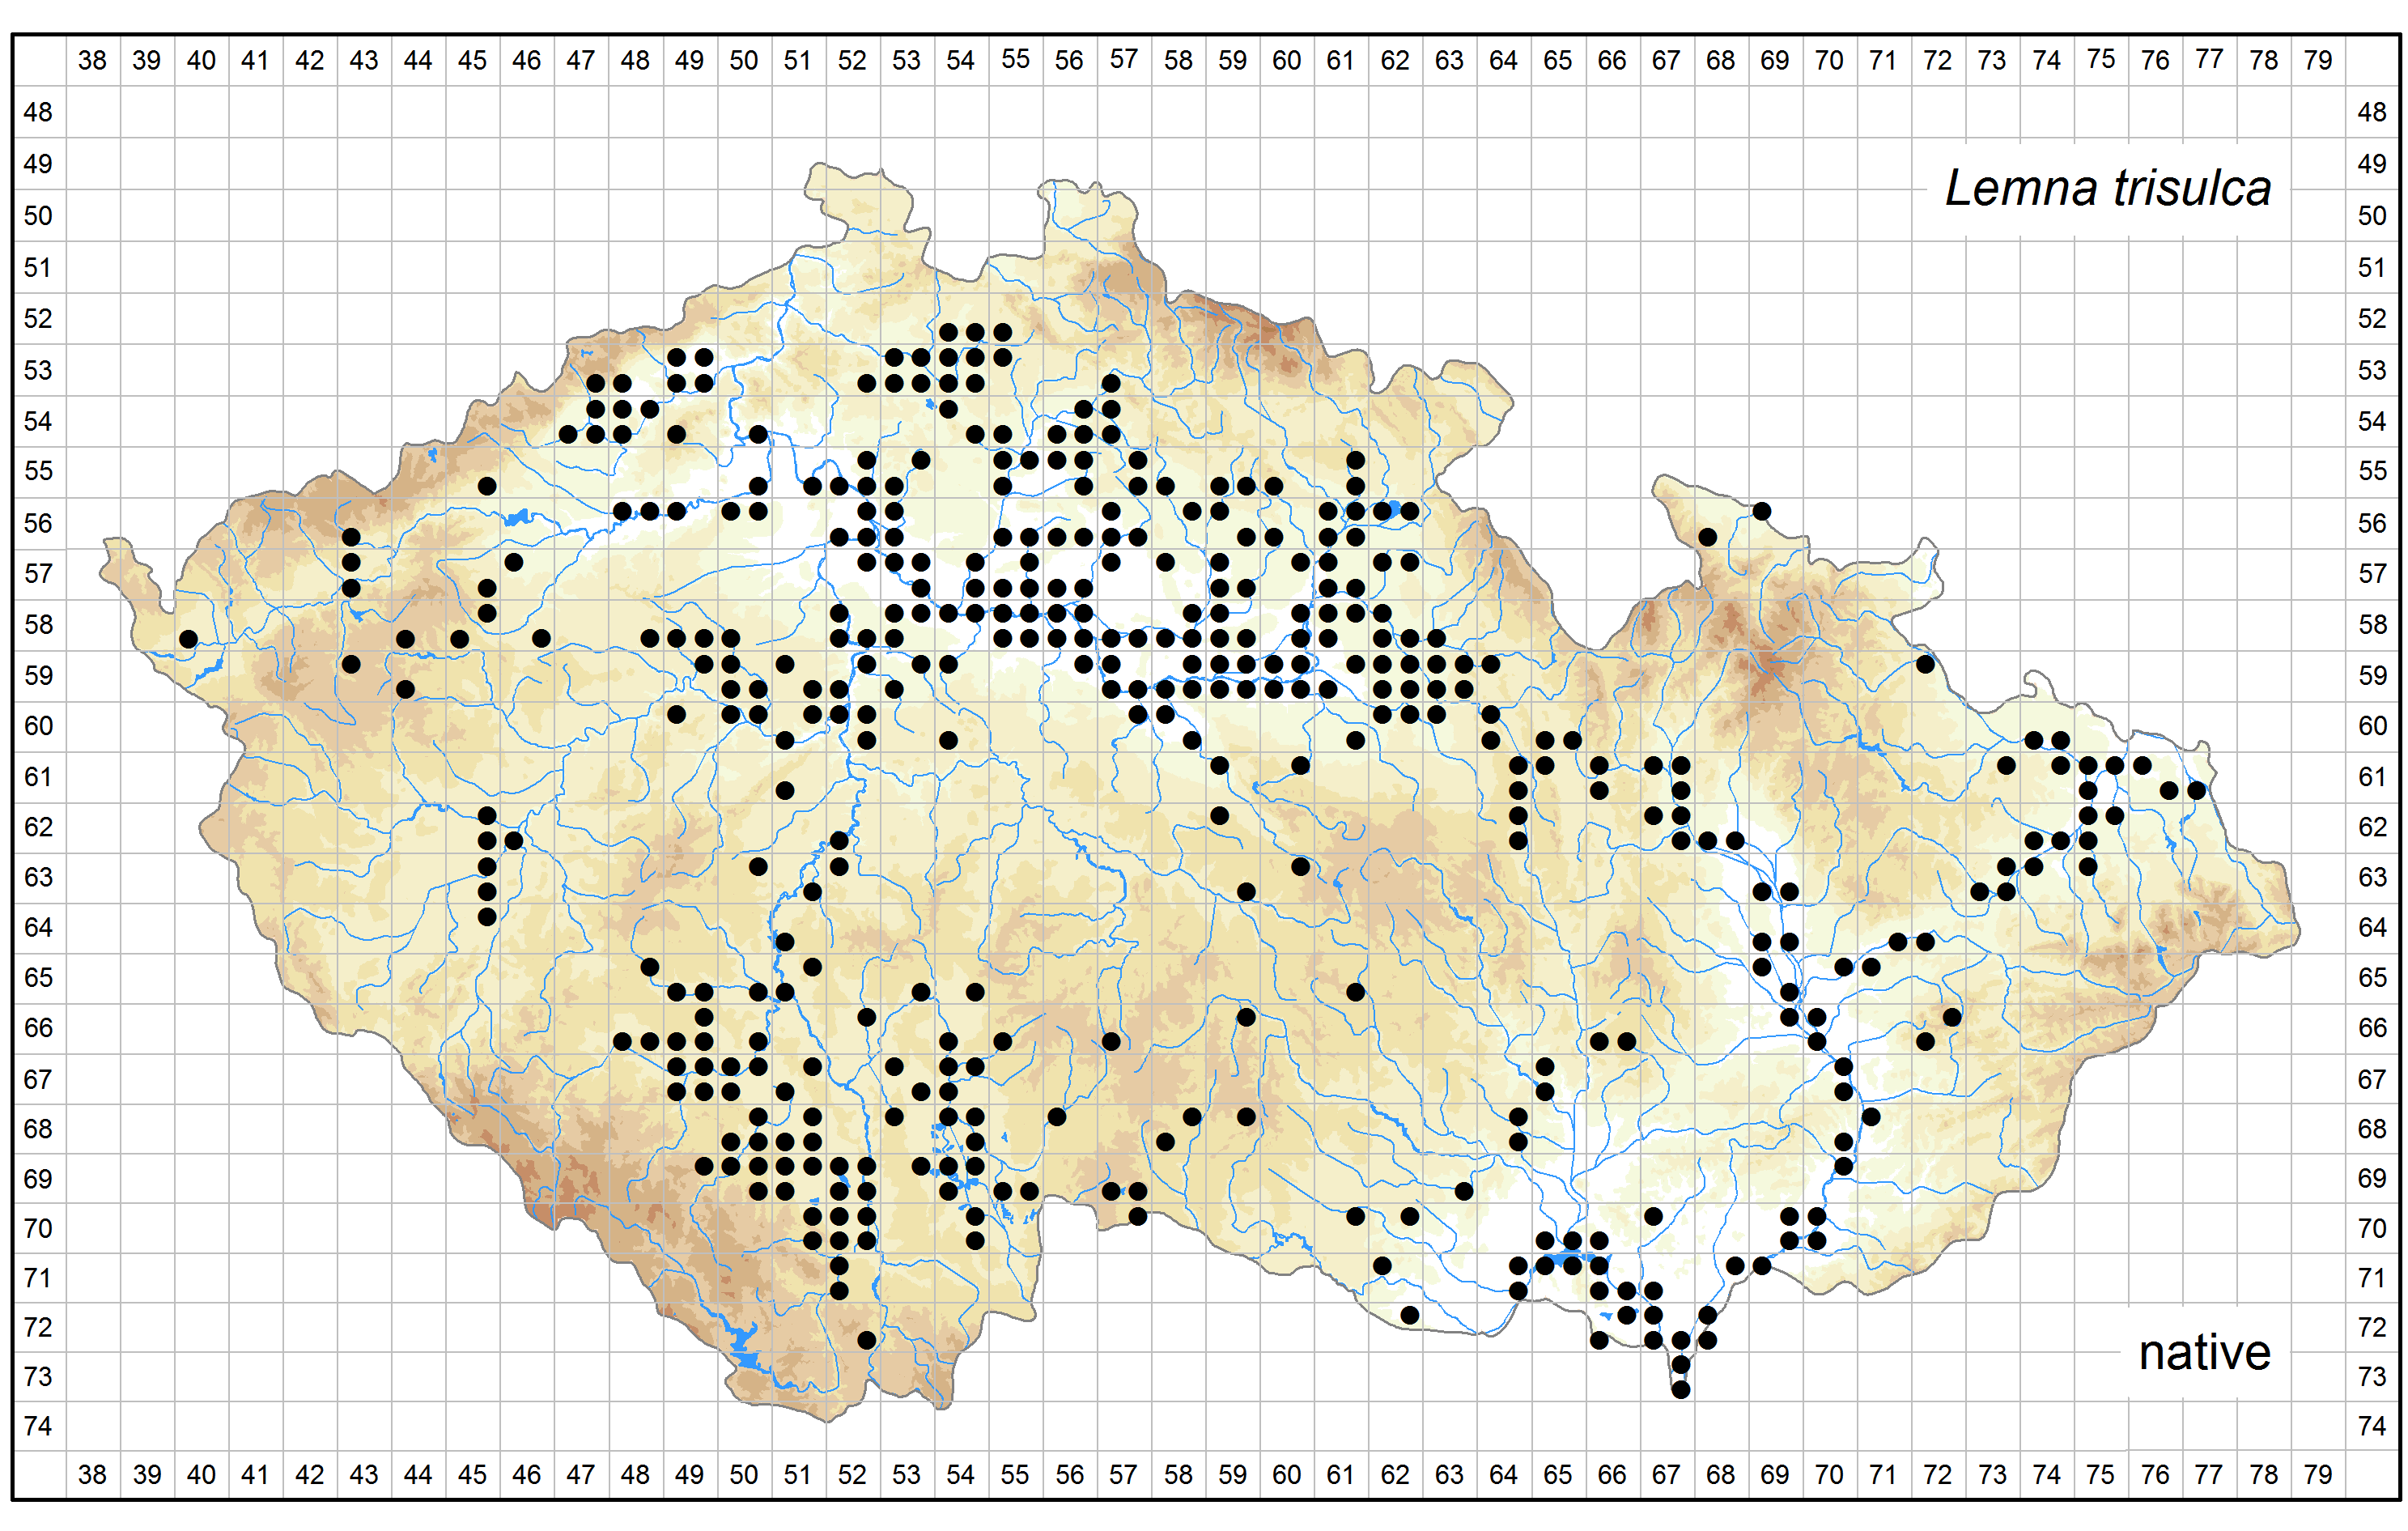 Distribution of Lemna trisulca in the Czech Republic Author of the map: Zdeněk Kaplan Map produced on: 11-11-2016 Database records used for producing the distribution map of Lemna trisulca published